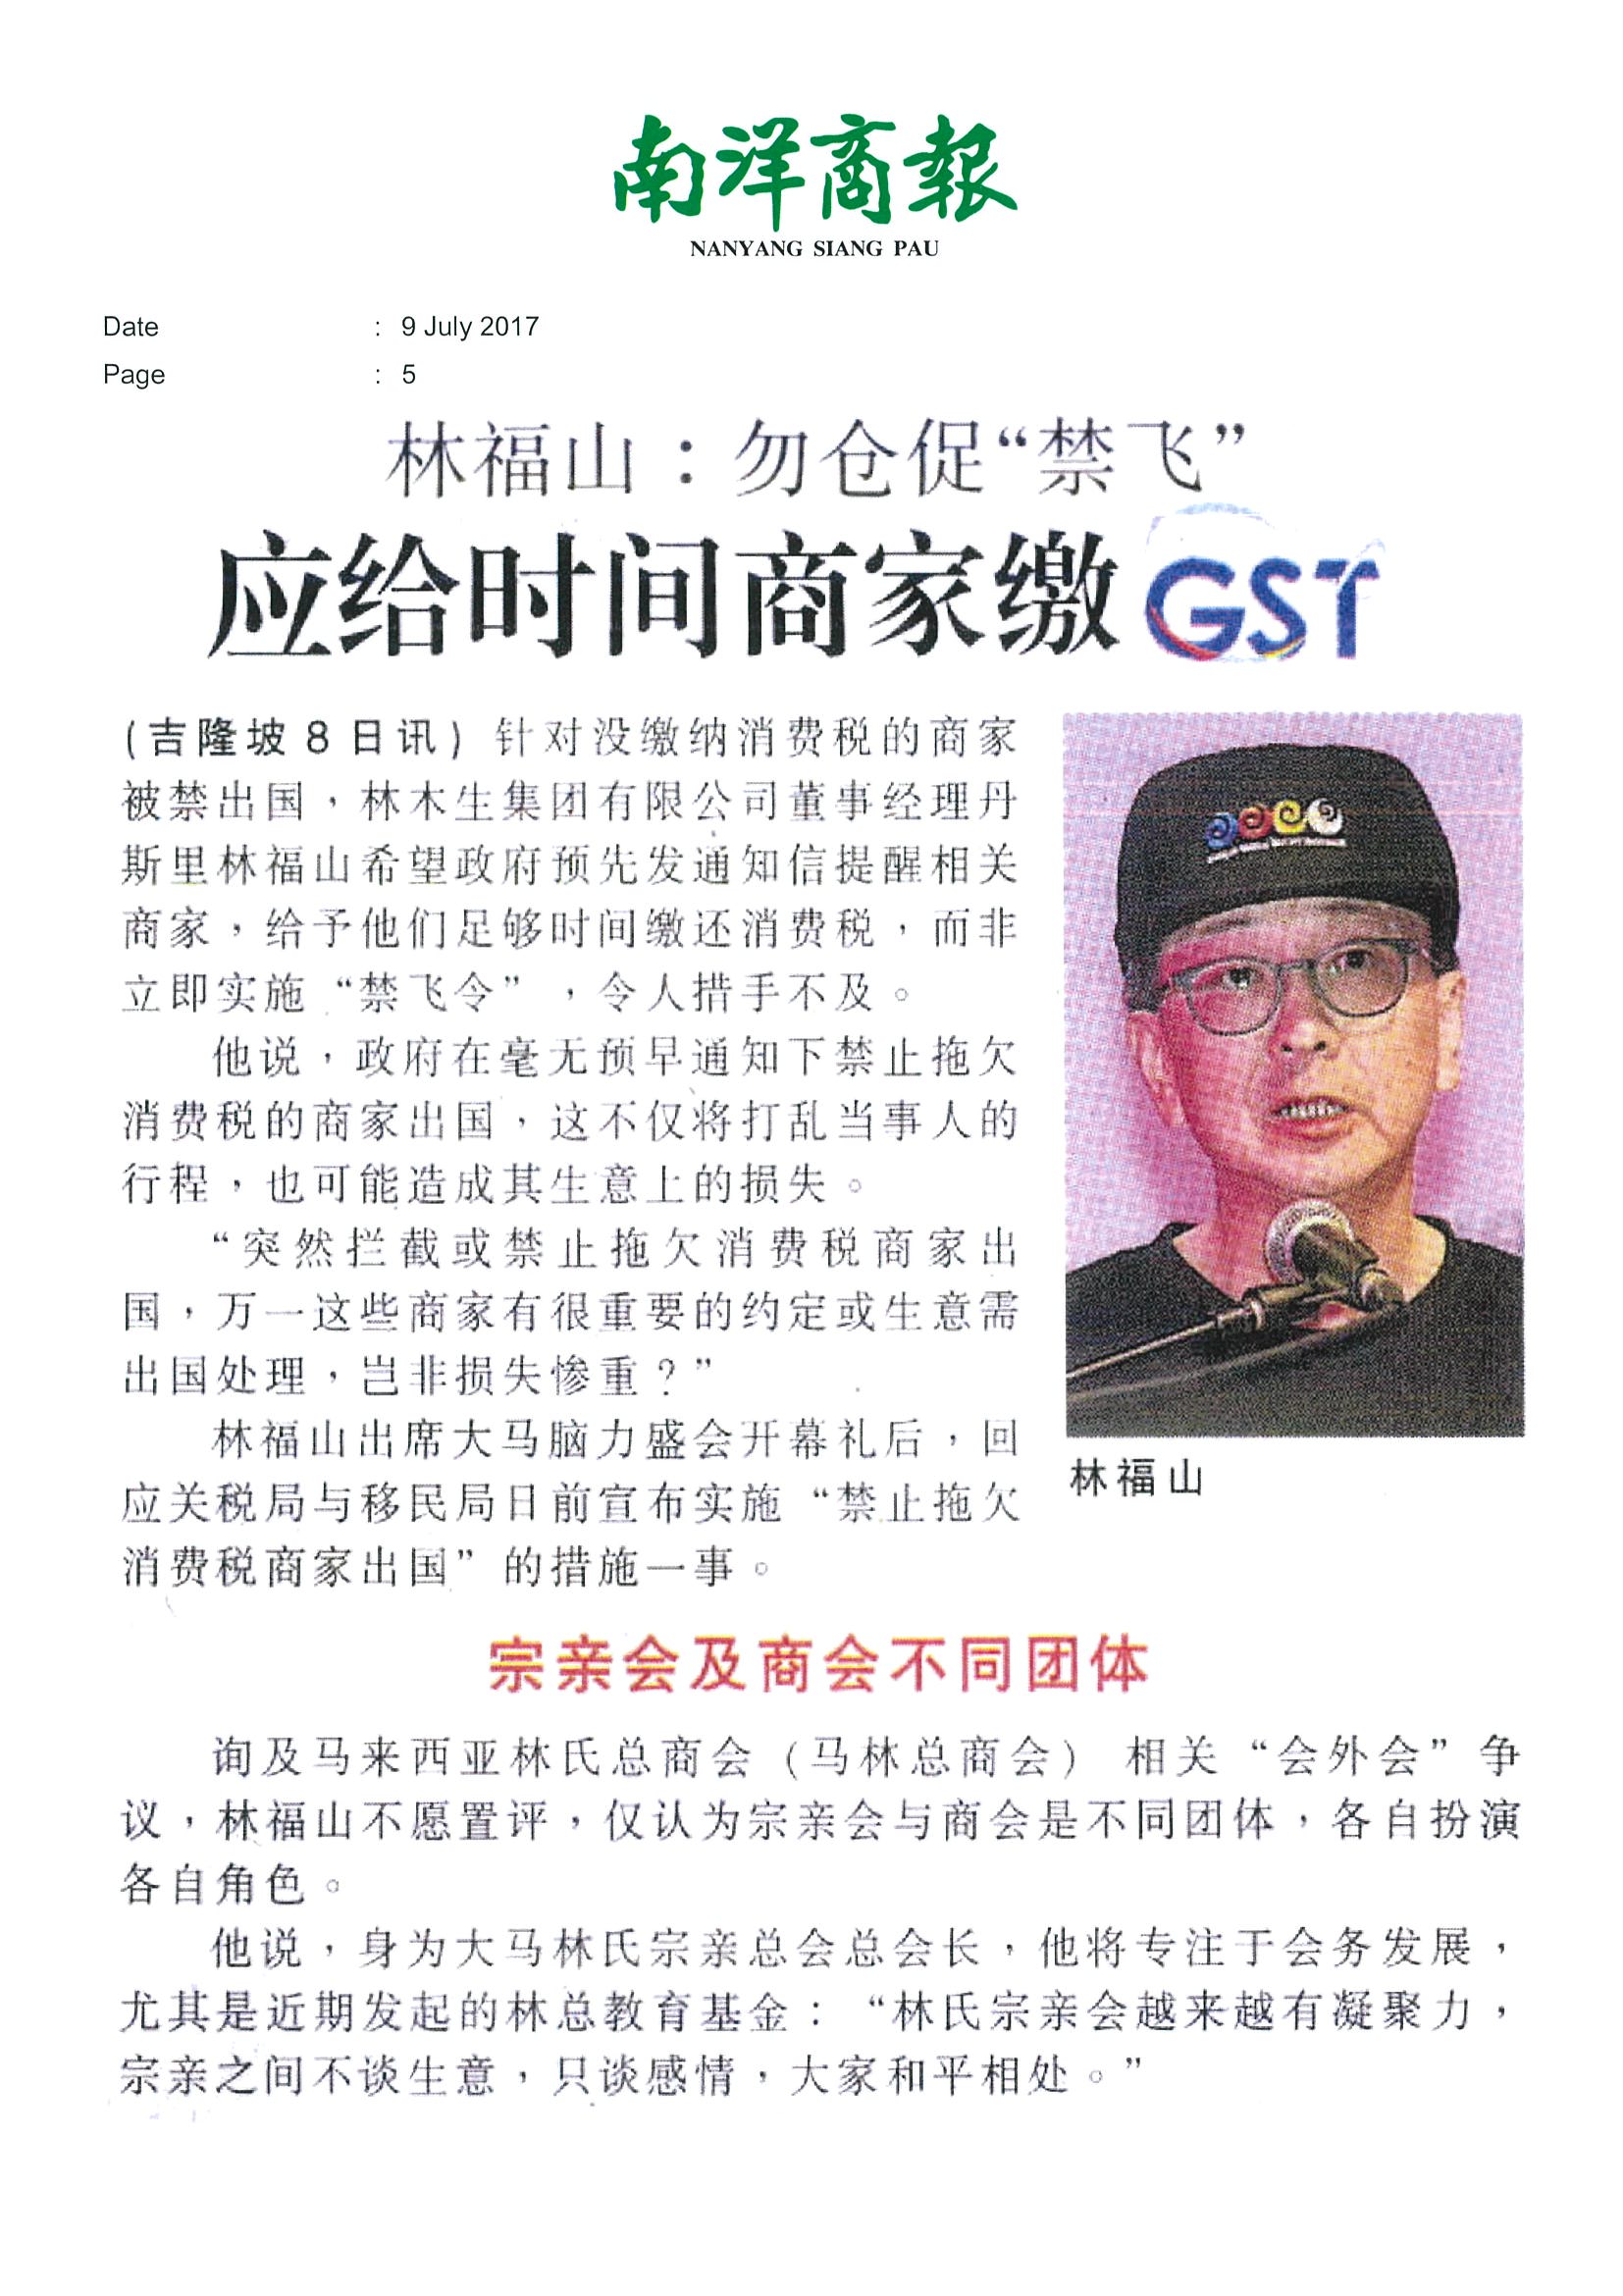 2017.07.09 Nanyang – Lim= Should give some time for businesses to clear GST